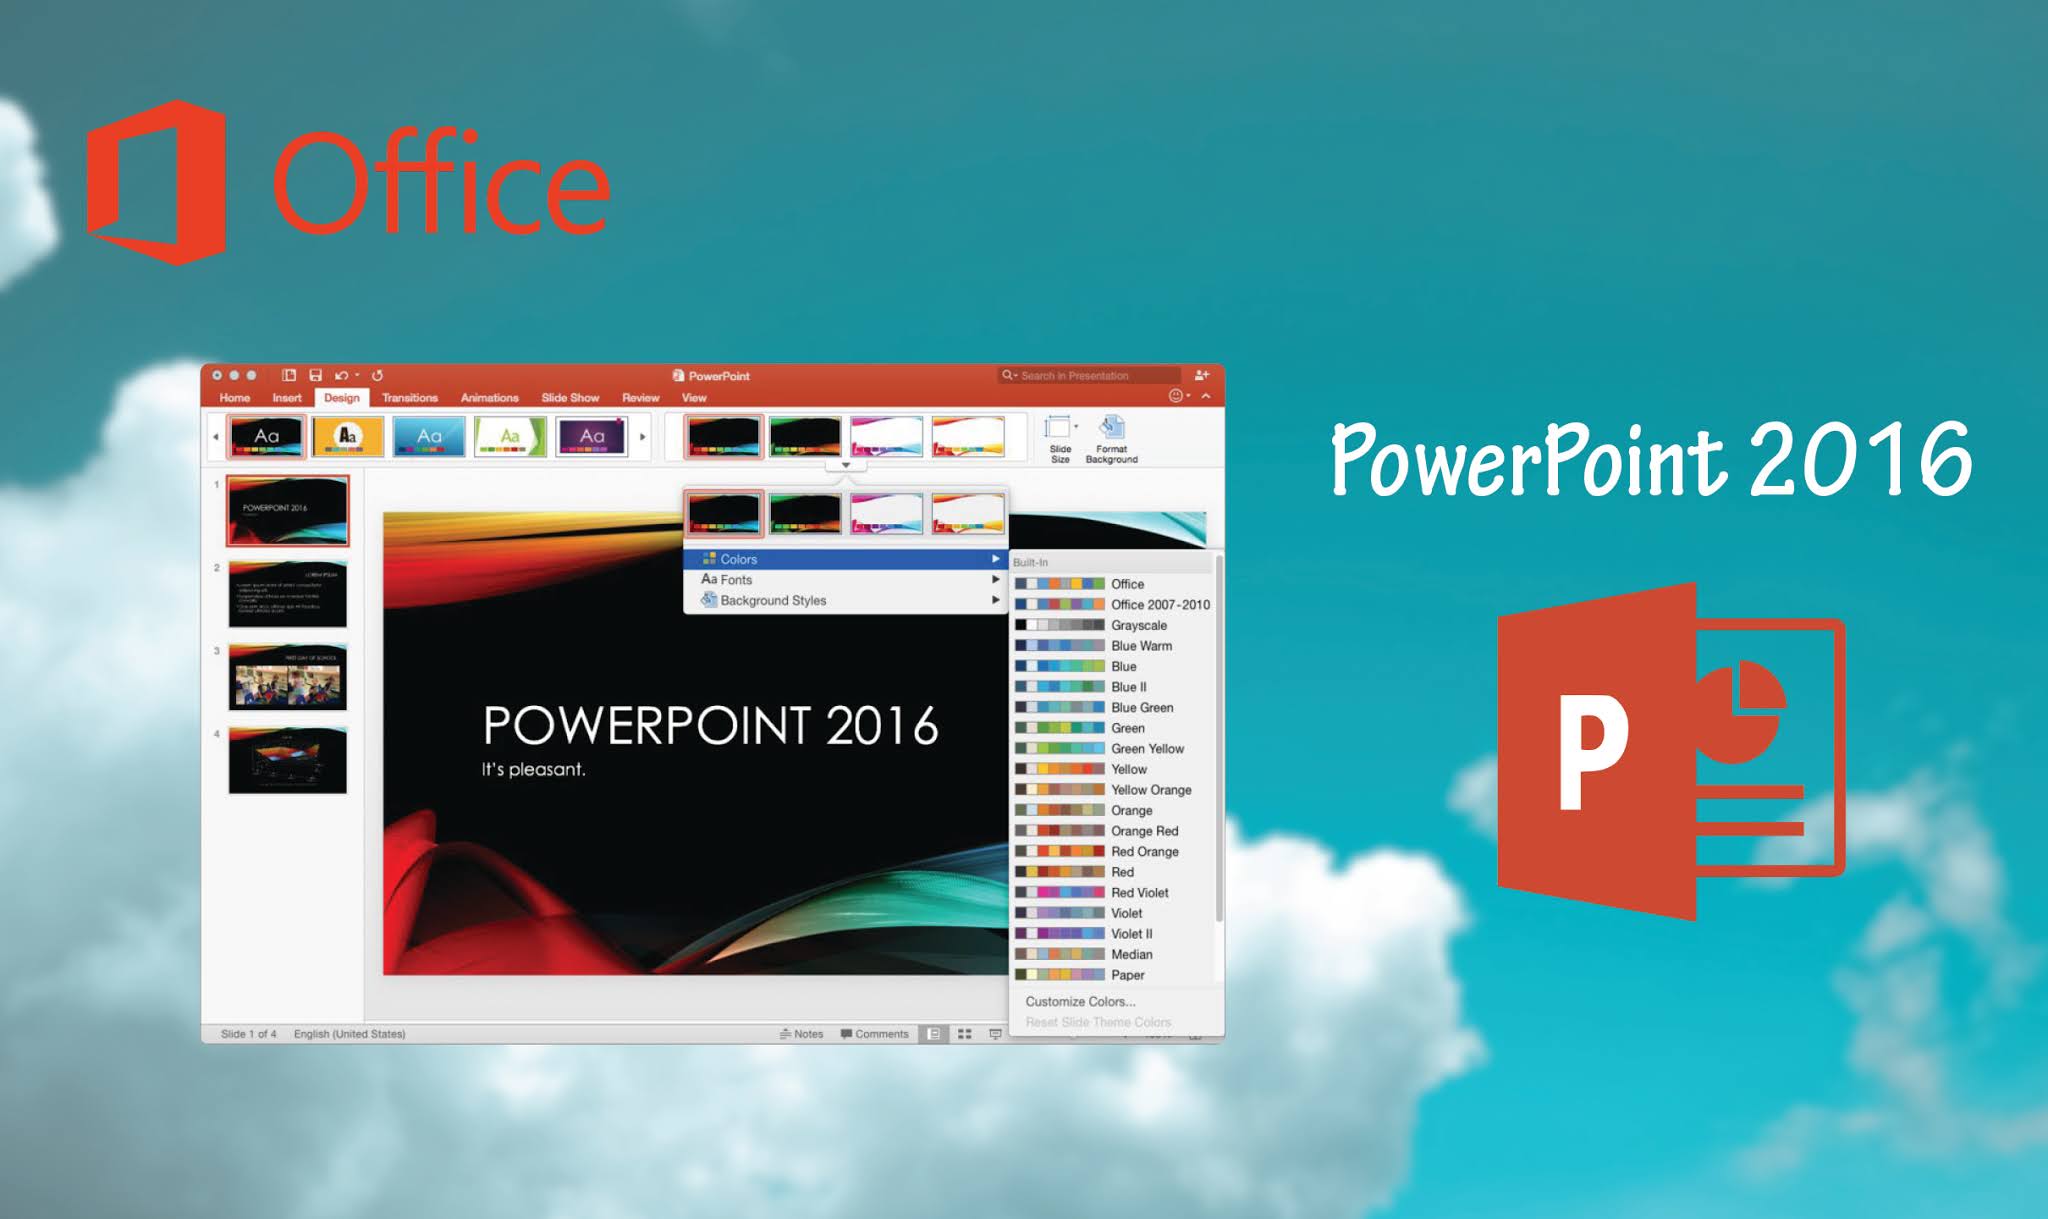 microsoft powerpoint viewer 2016 free download